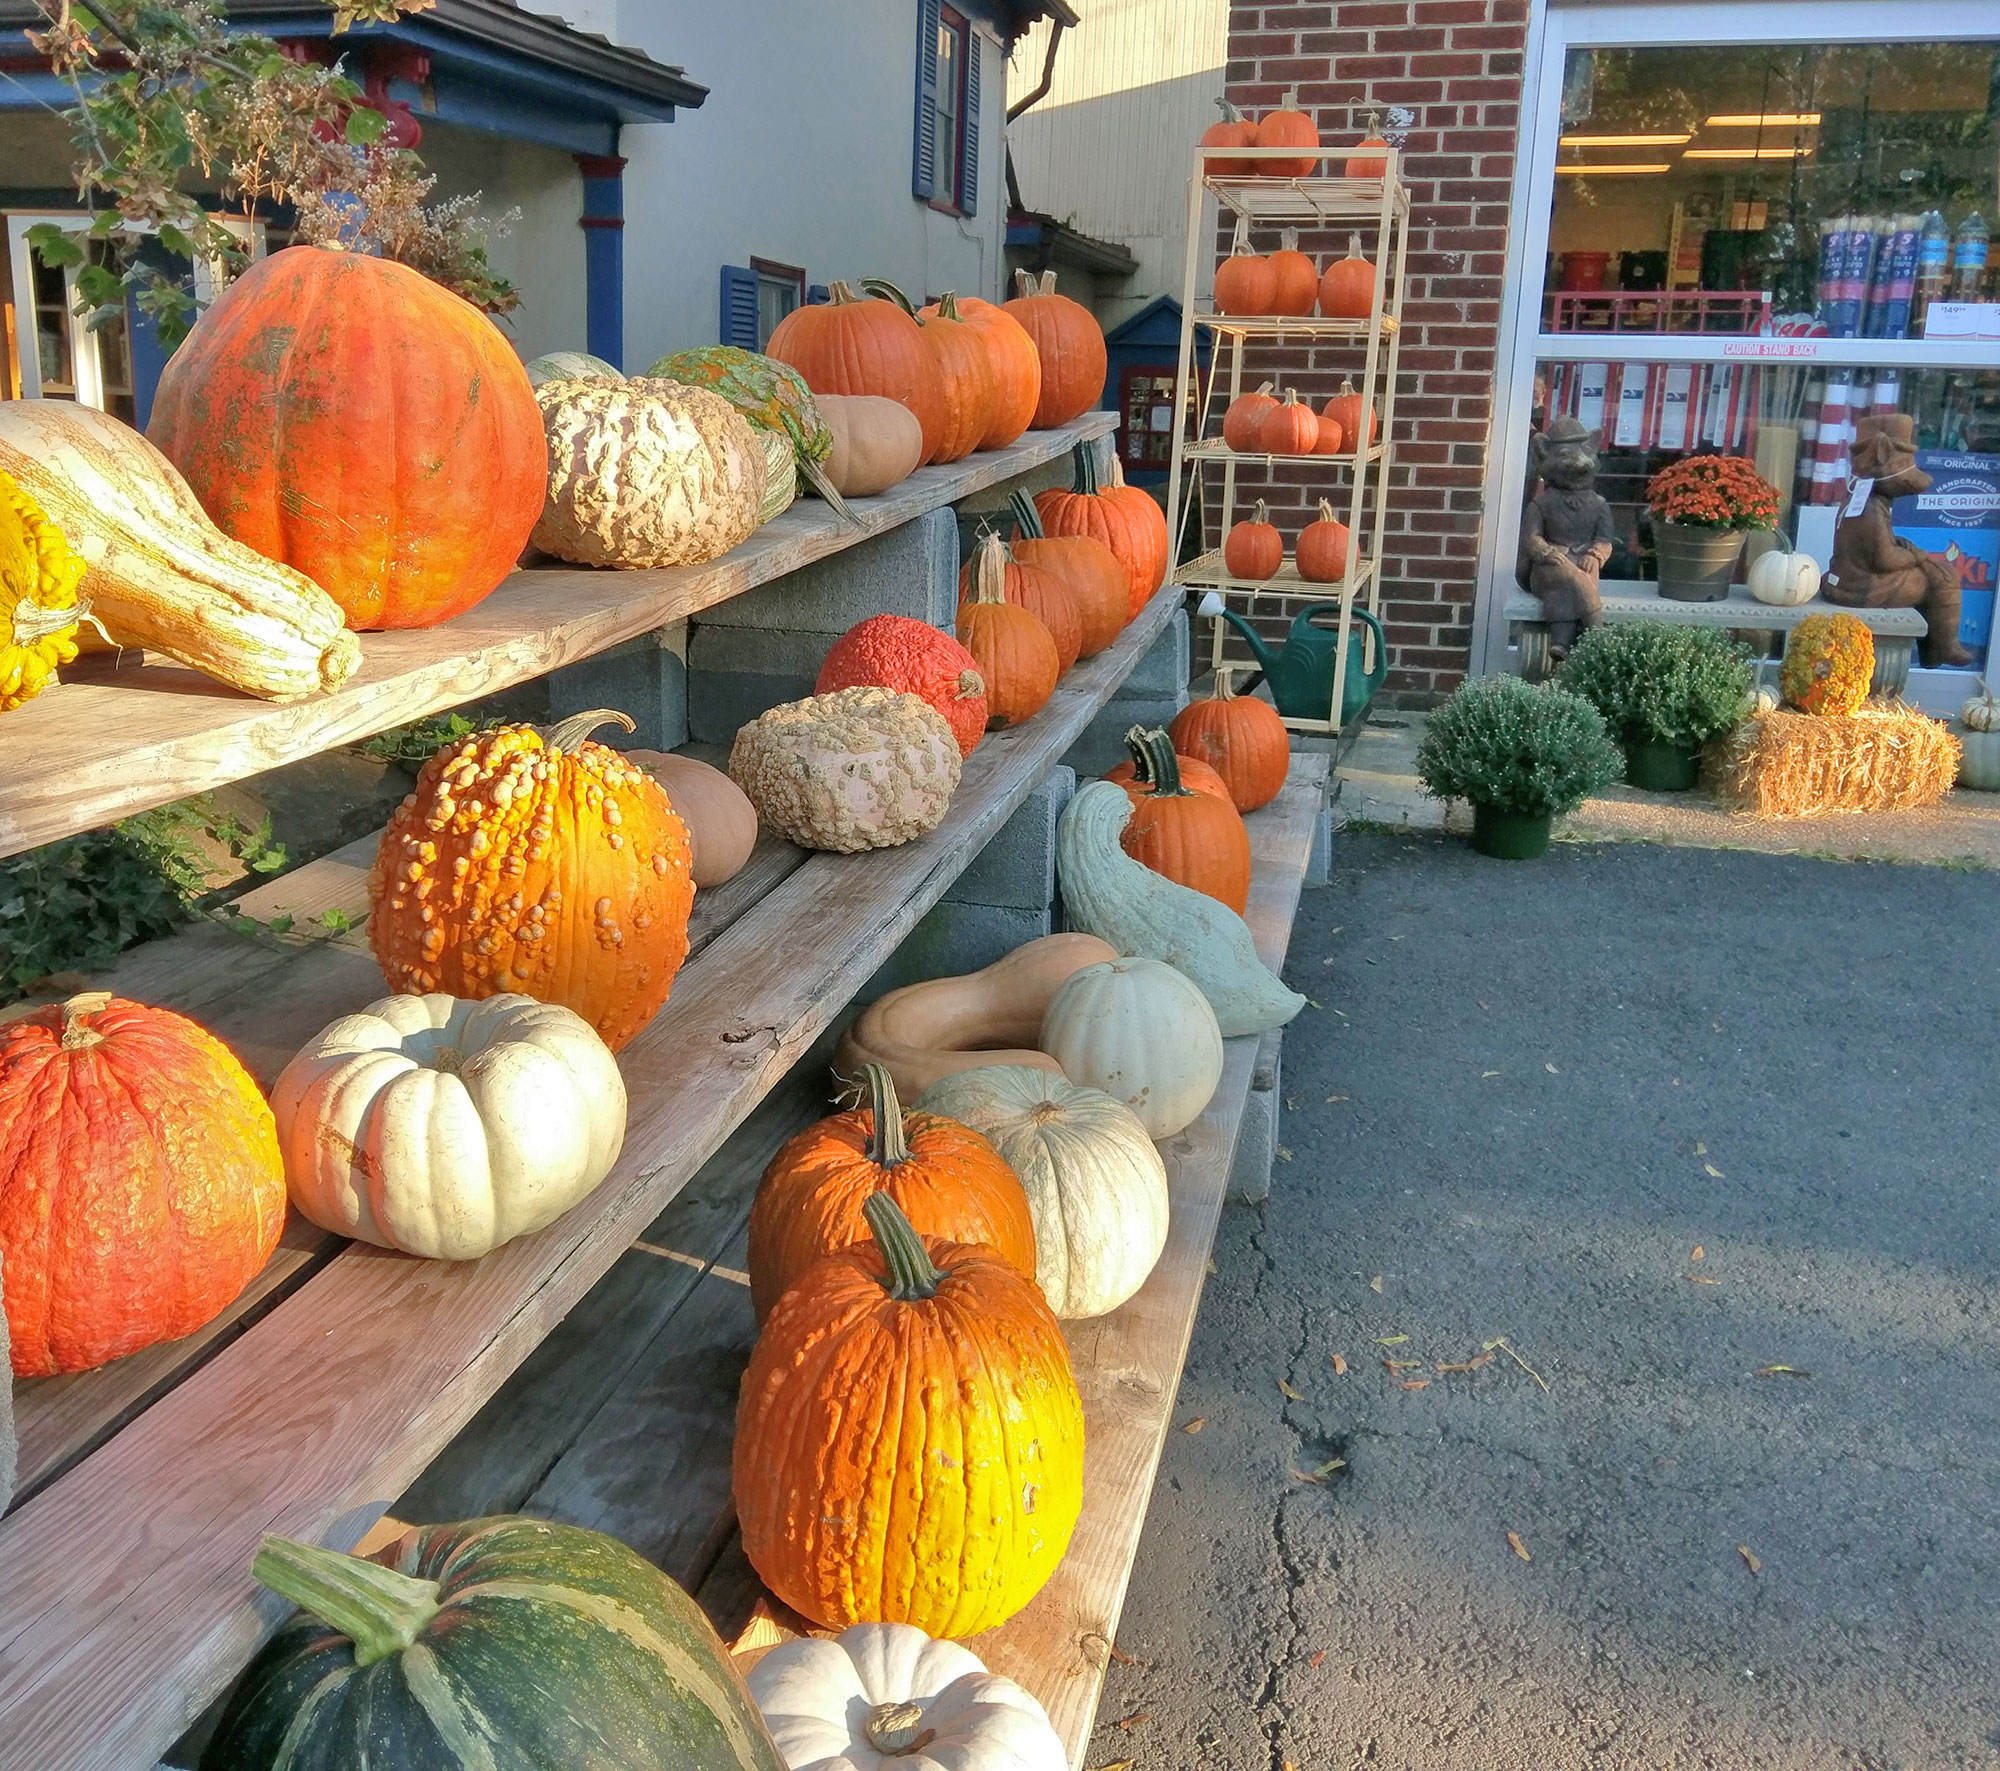 Pumpkins for sale at a hardware store in Middleburg, VA